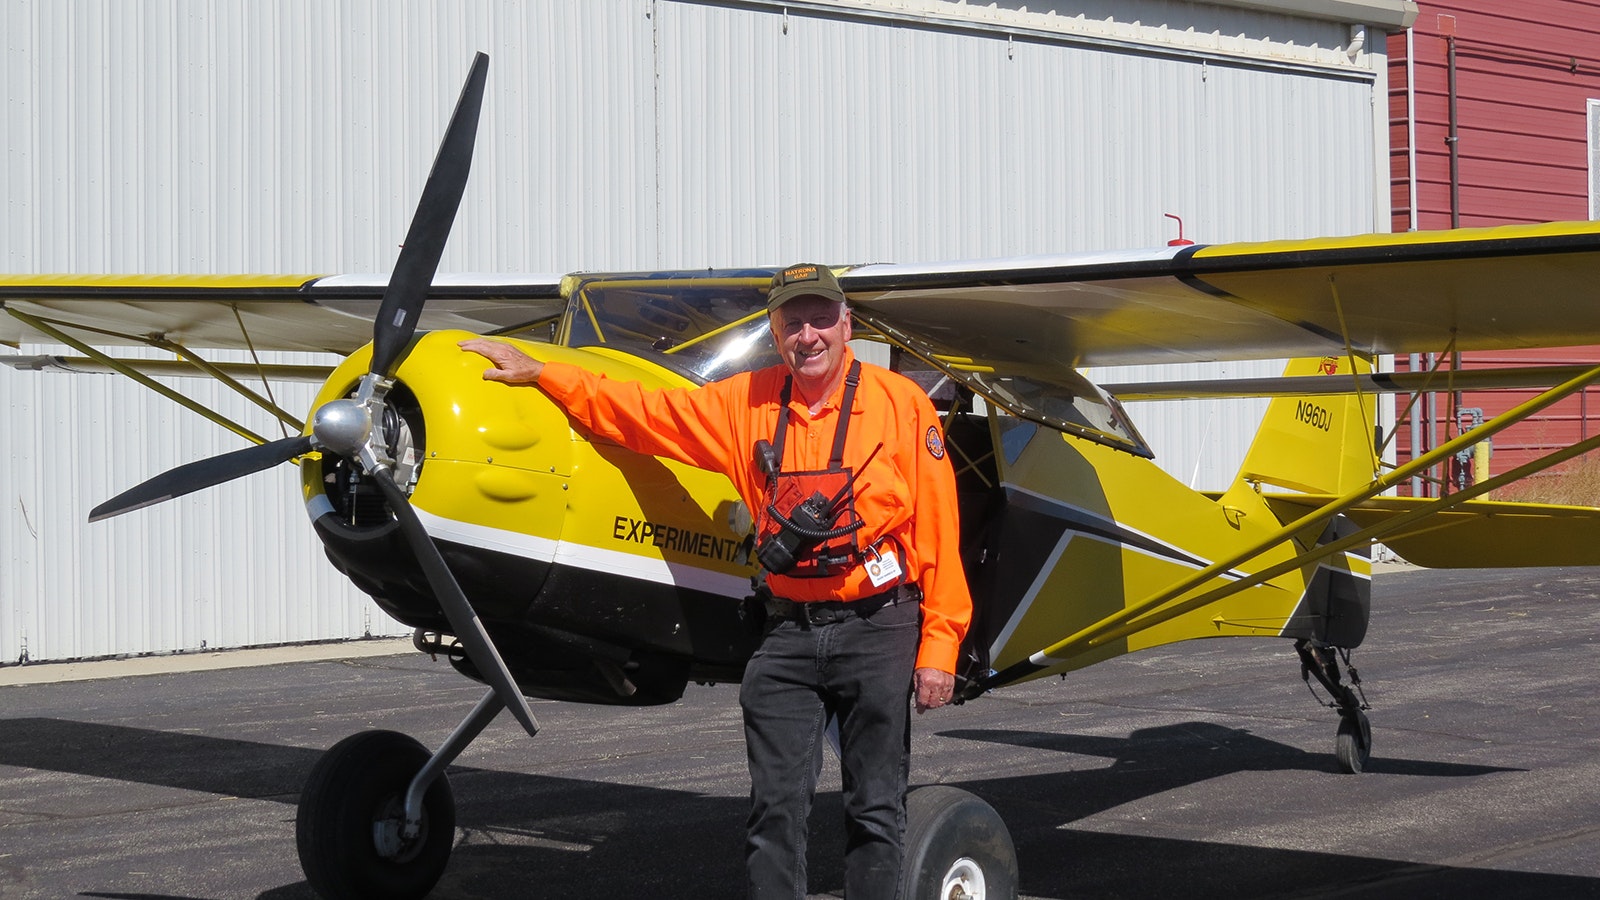 Dallas Chopping bought a Kitfox experimental airplane for his retirement. Enjoys flying through the West with fellow “taildraggers.”